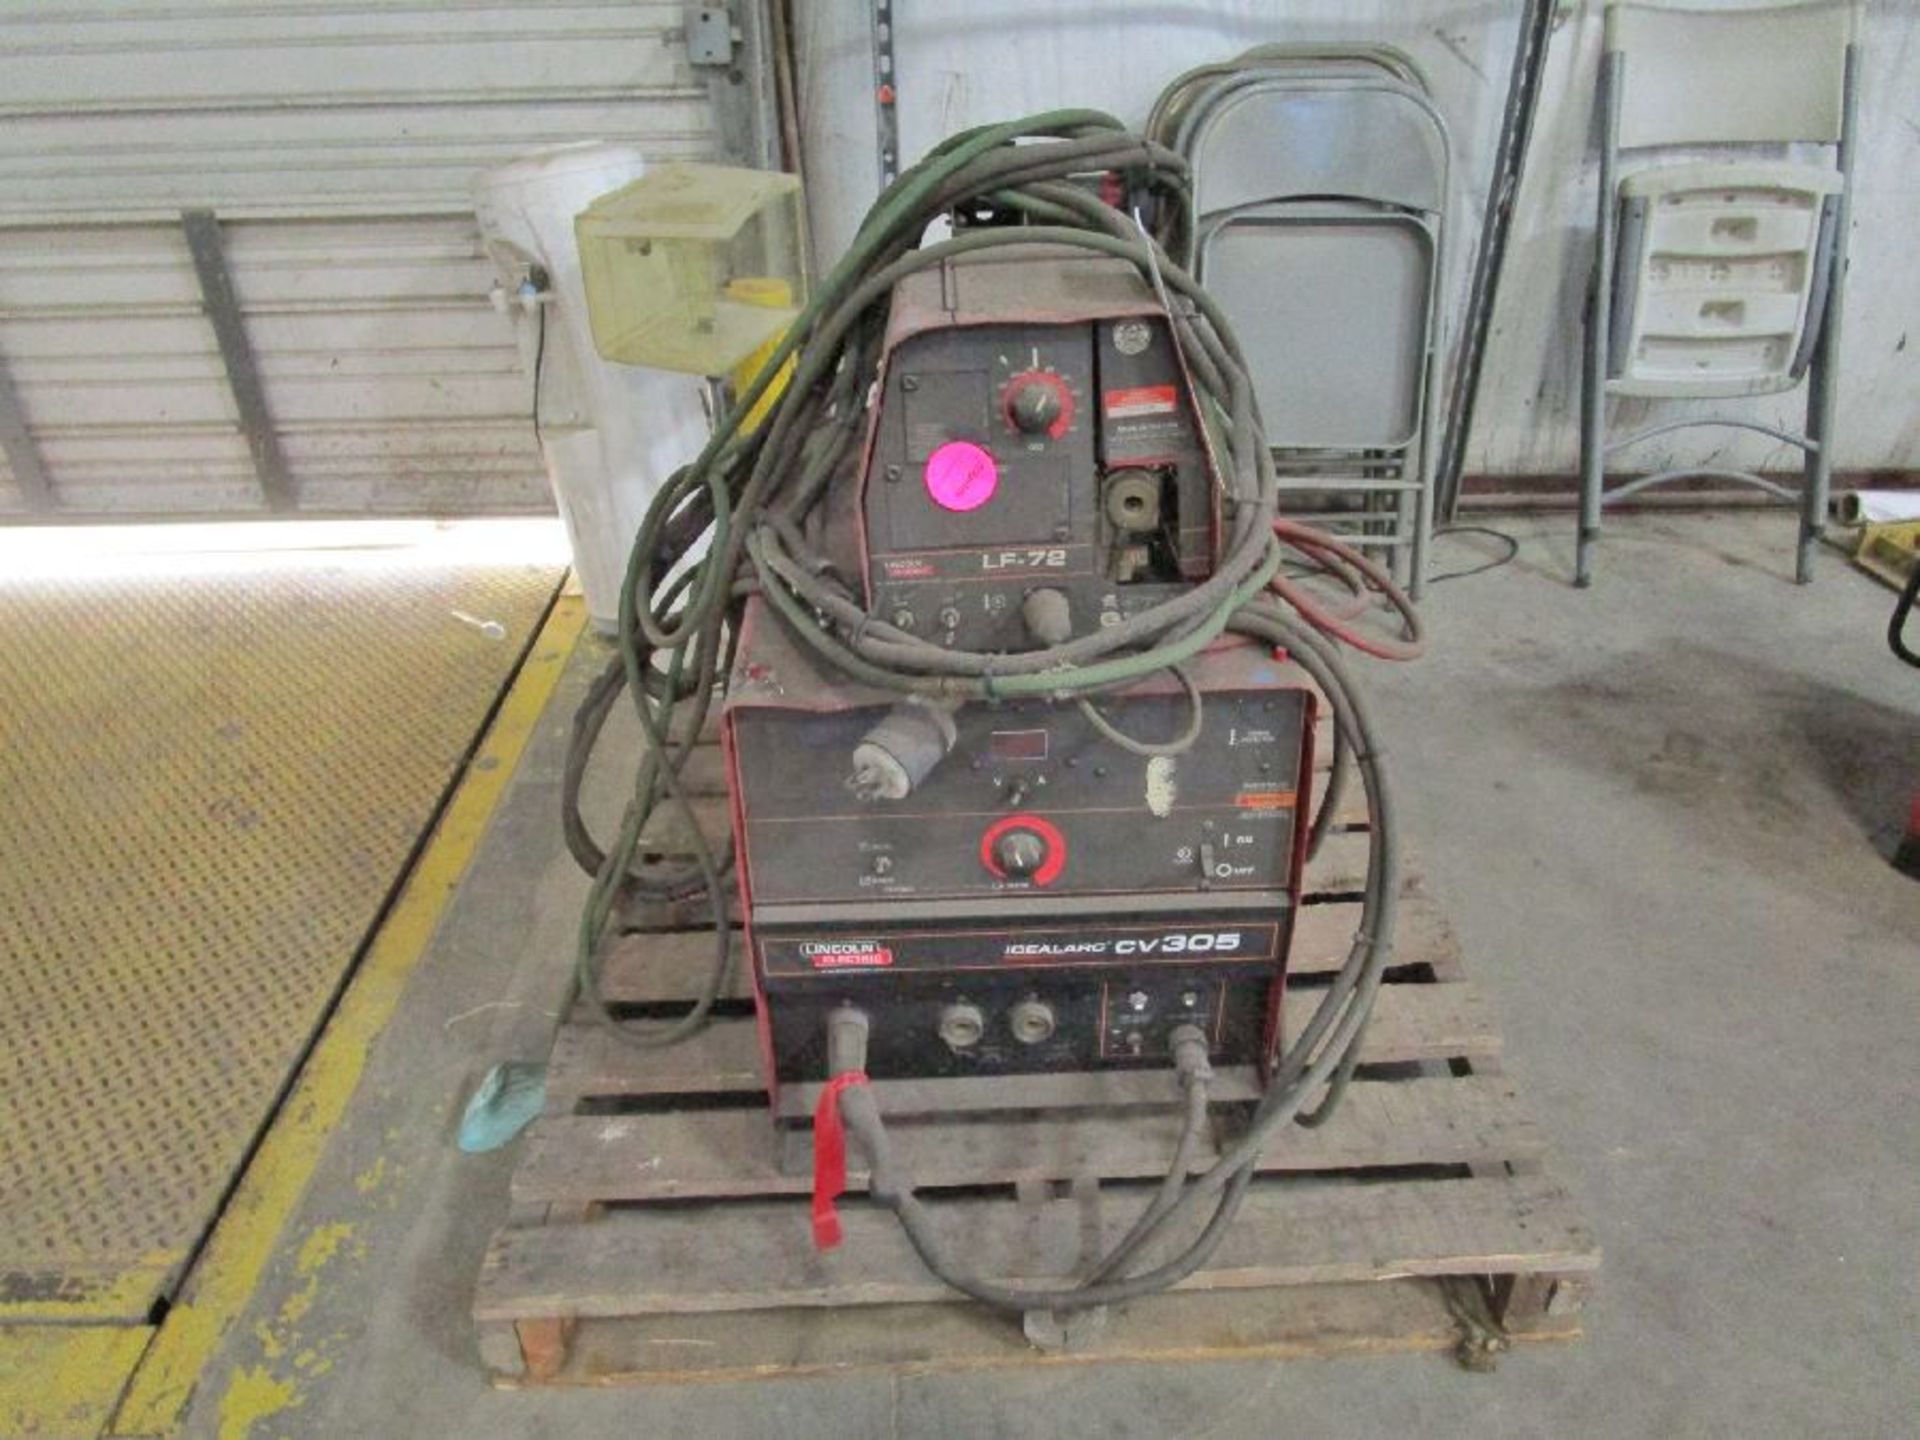 Lincoln Electric Model CV 305 Welding Power Source